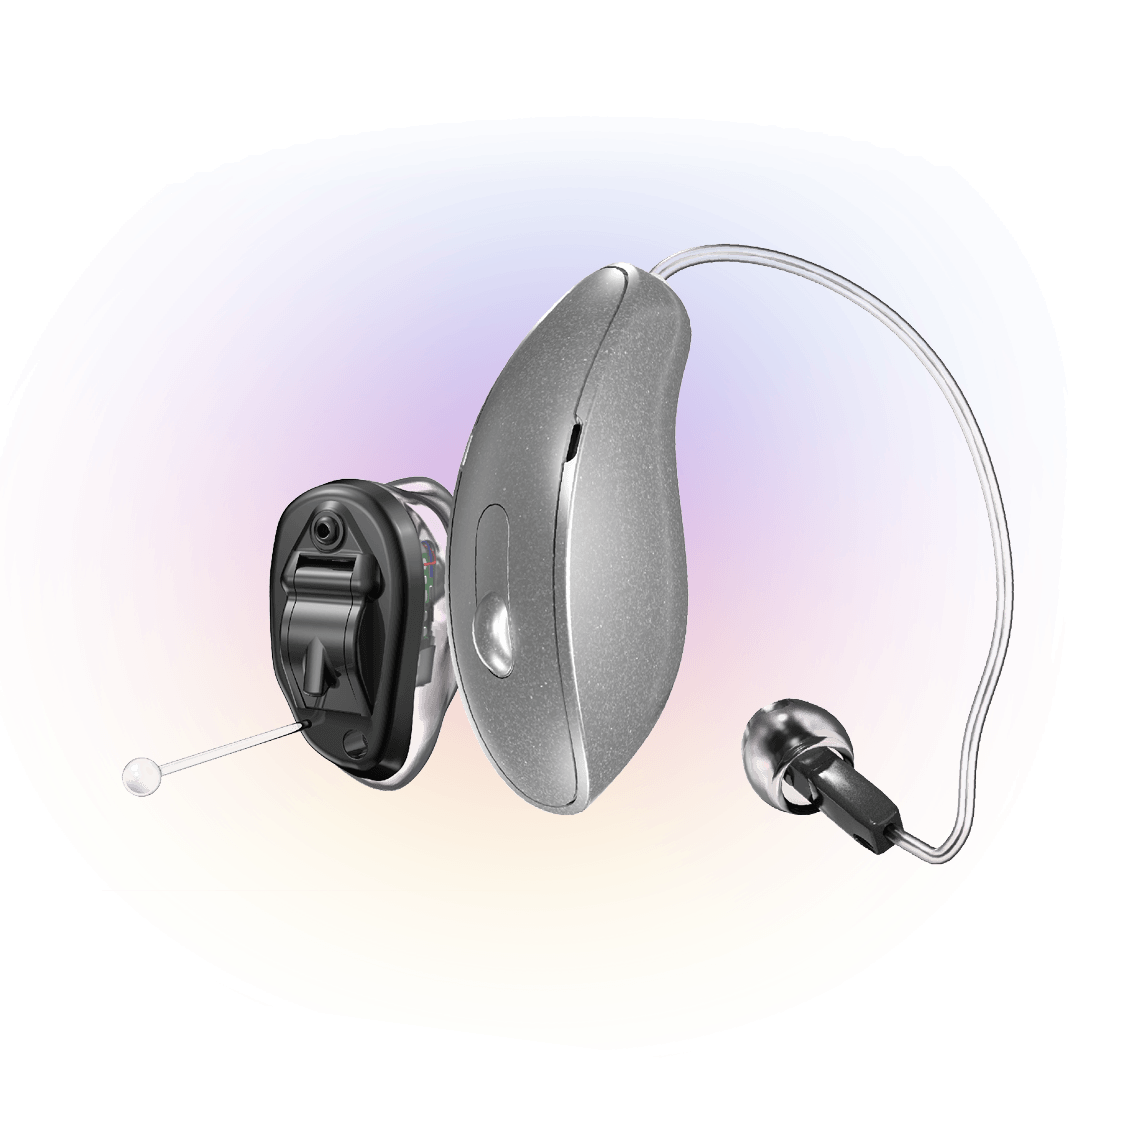 Audibel's Line of Over-The-Ear Hearing Aids for Hearing Loss